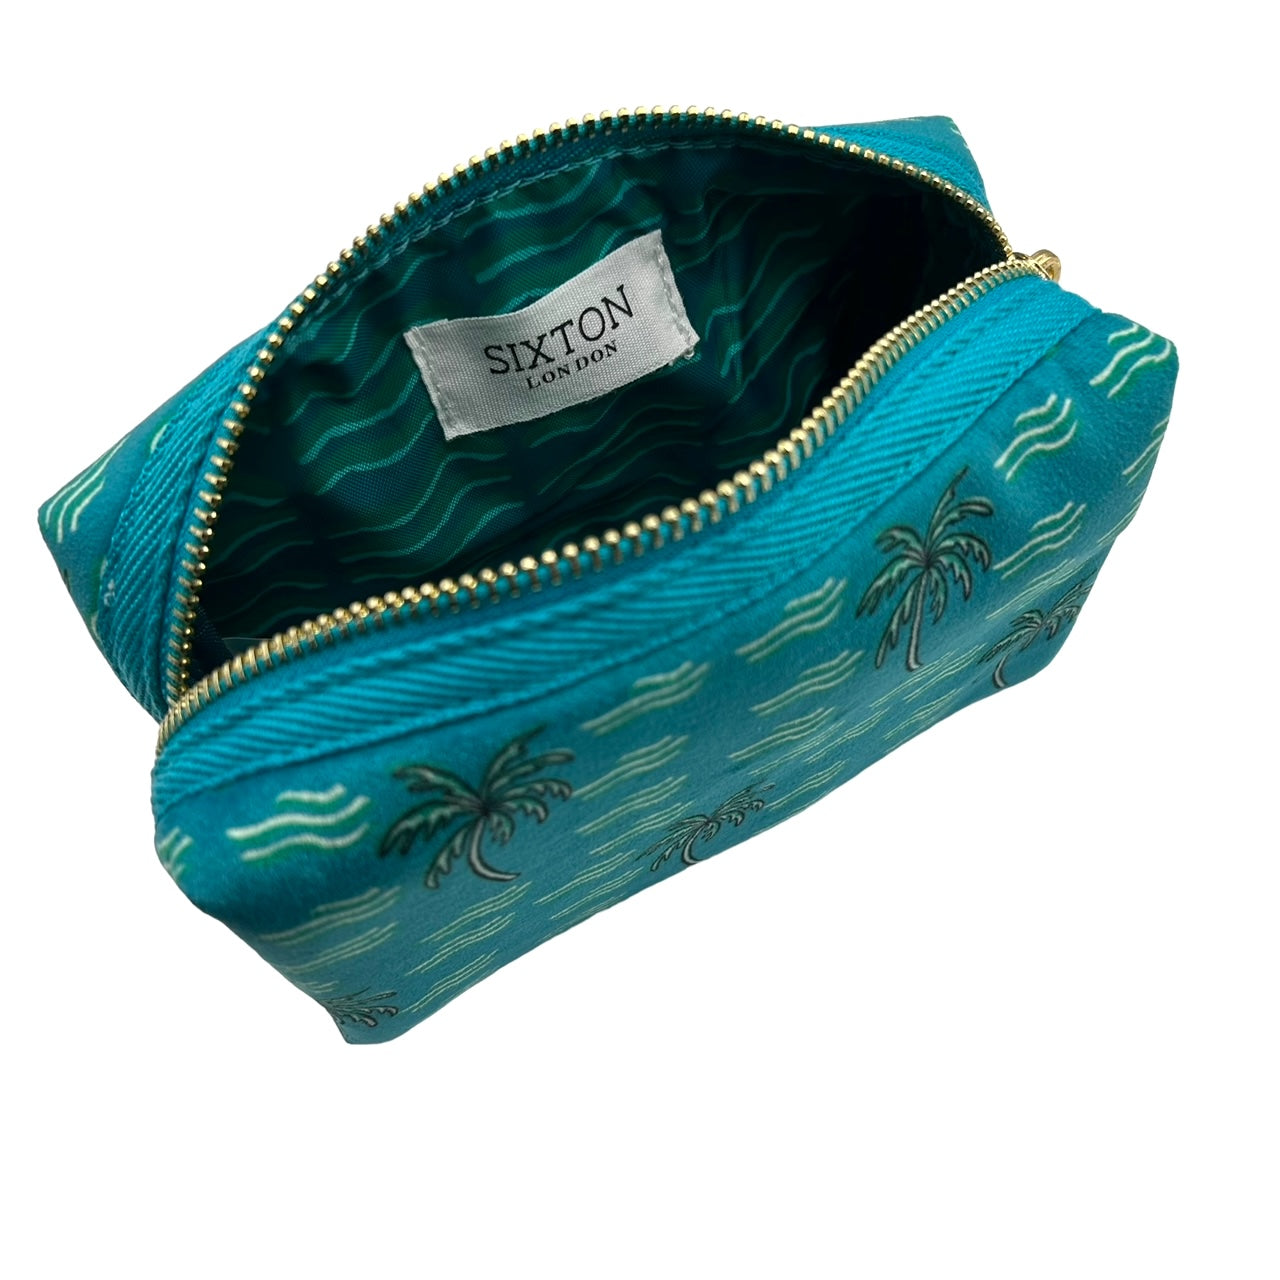 Teal palm large make-up bag & gold lashes brooch - recycled velvet, large and small